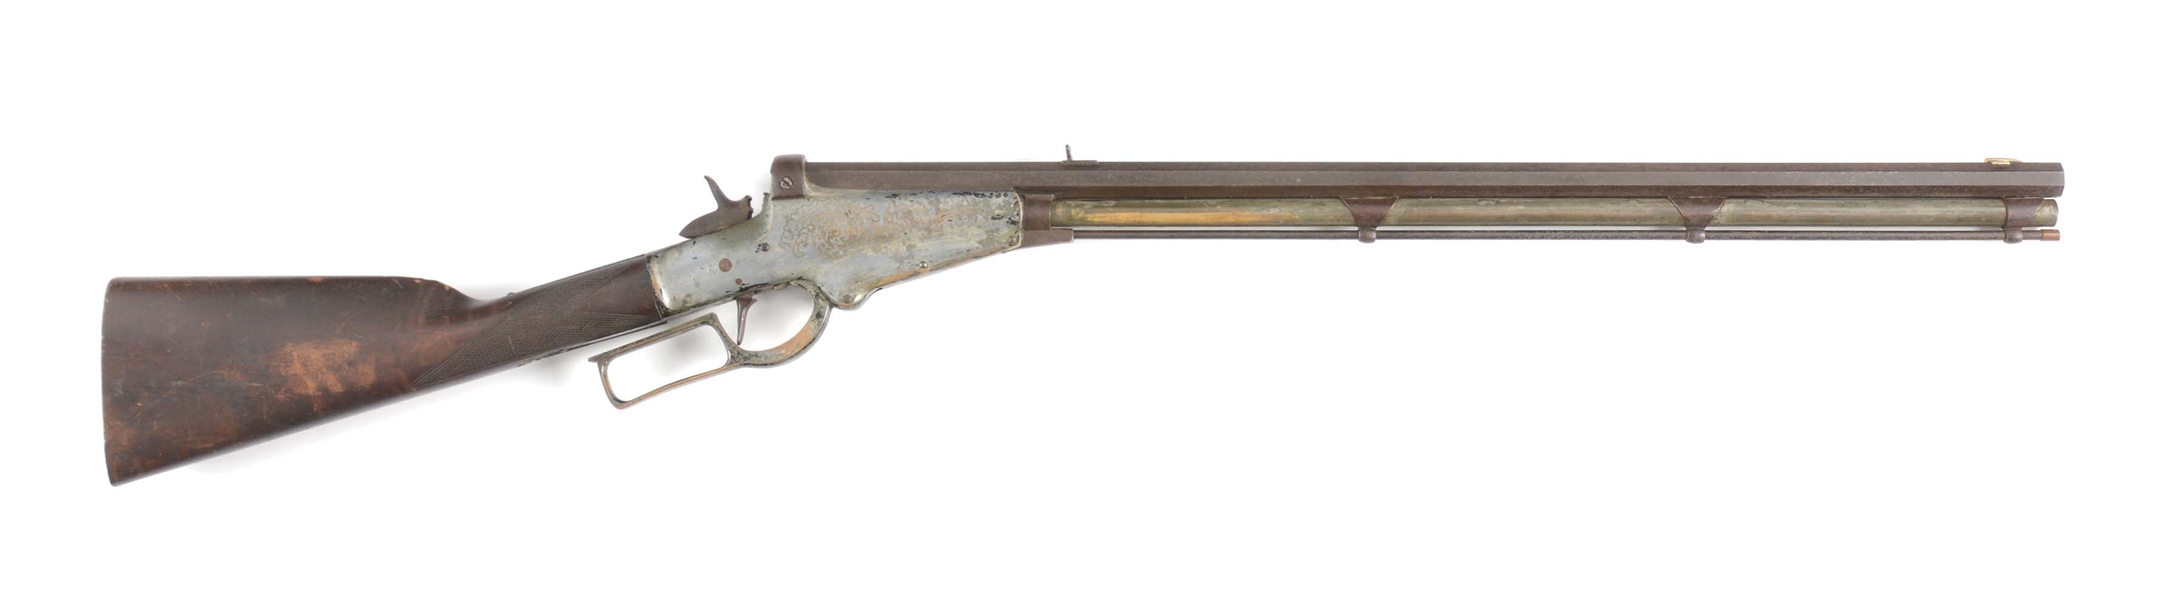 (A) ALTMAIER LEVER ACTION RIFLE, SERIAL NUMBER 1.